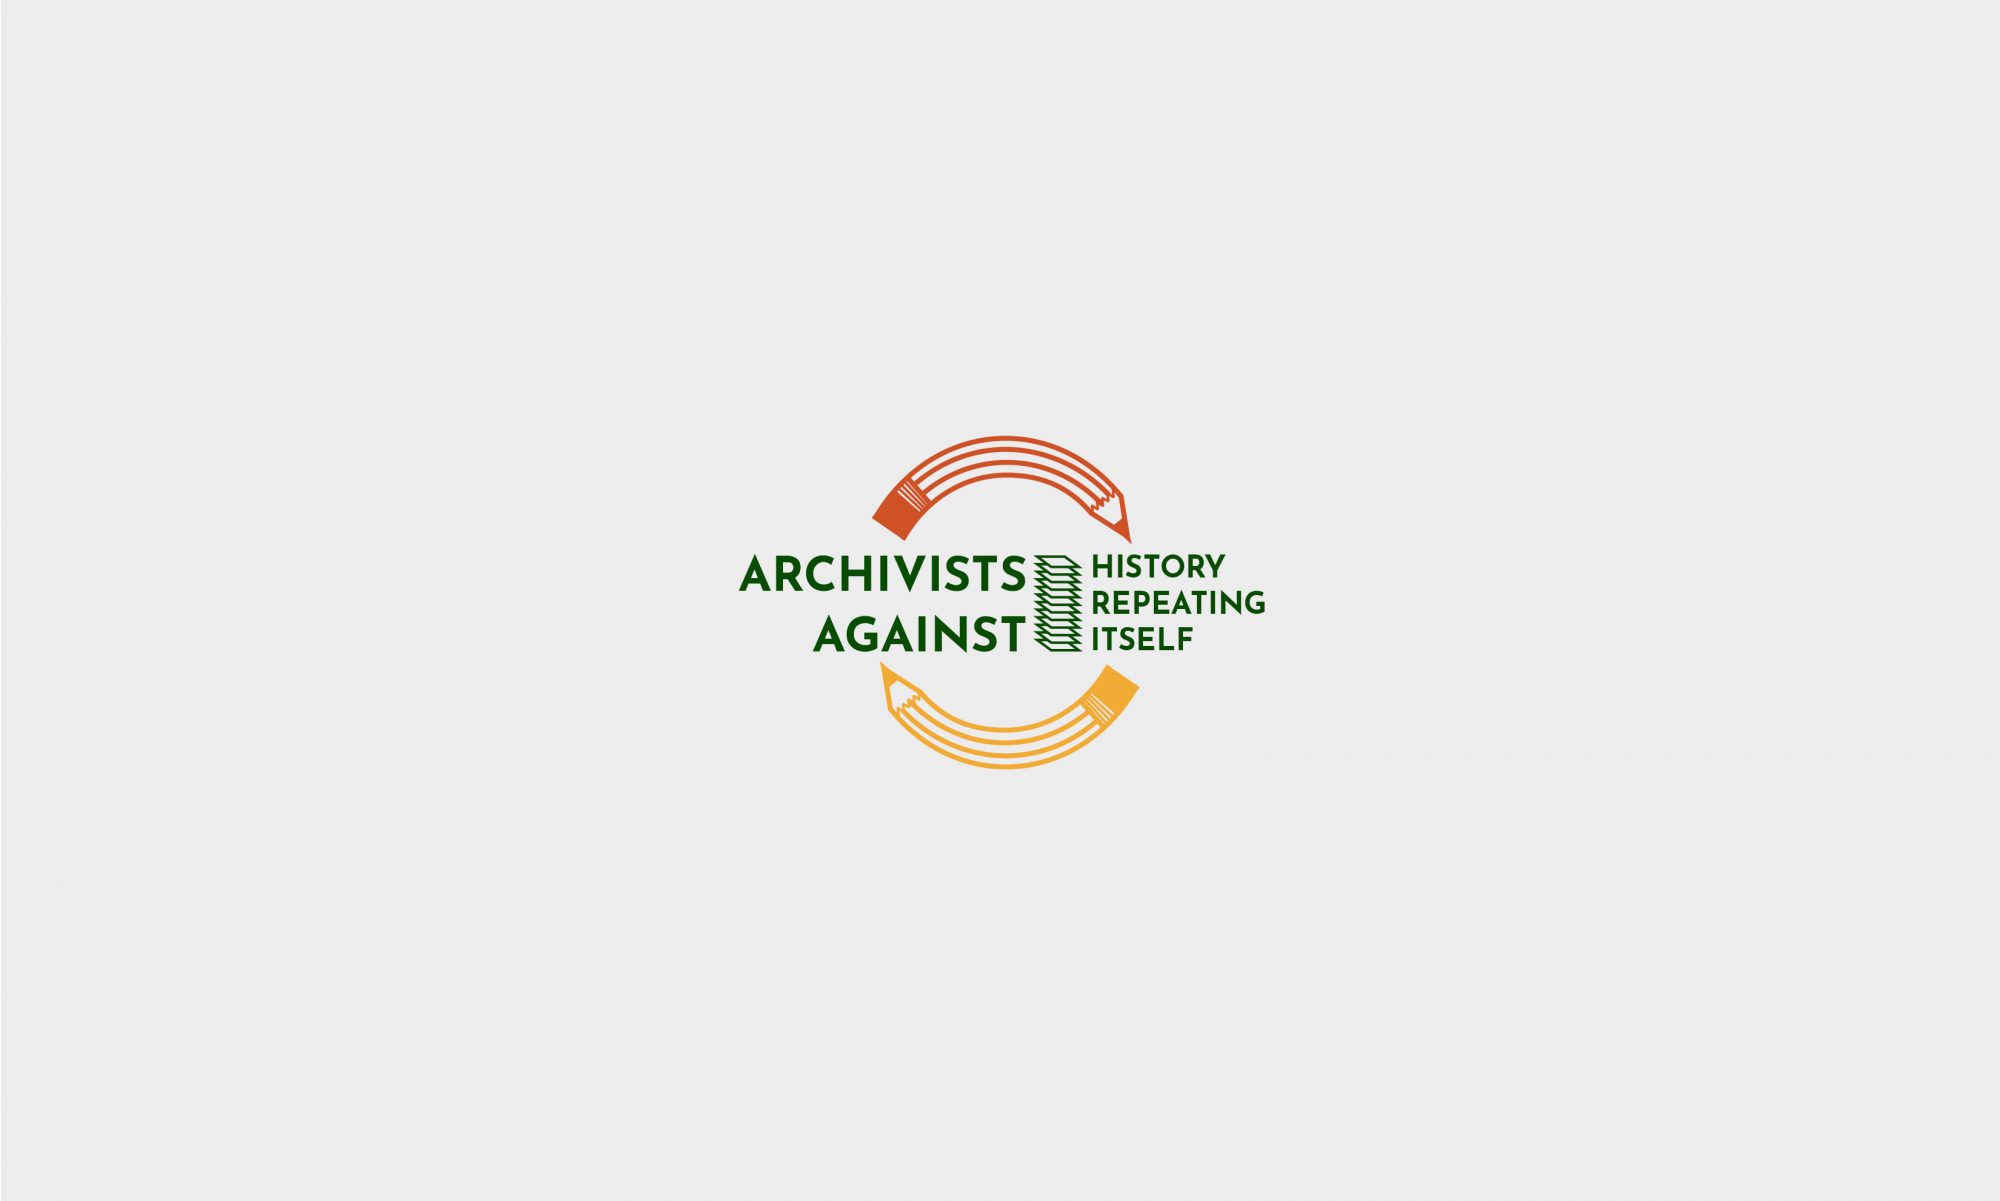 Archivists Against History Repeating Itself